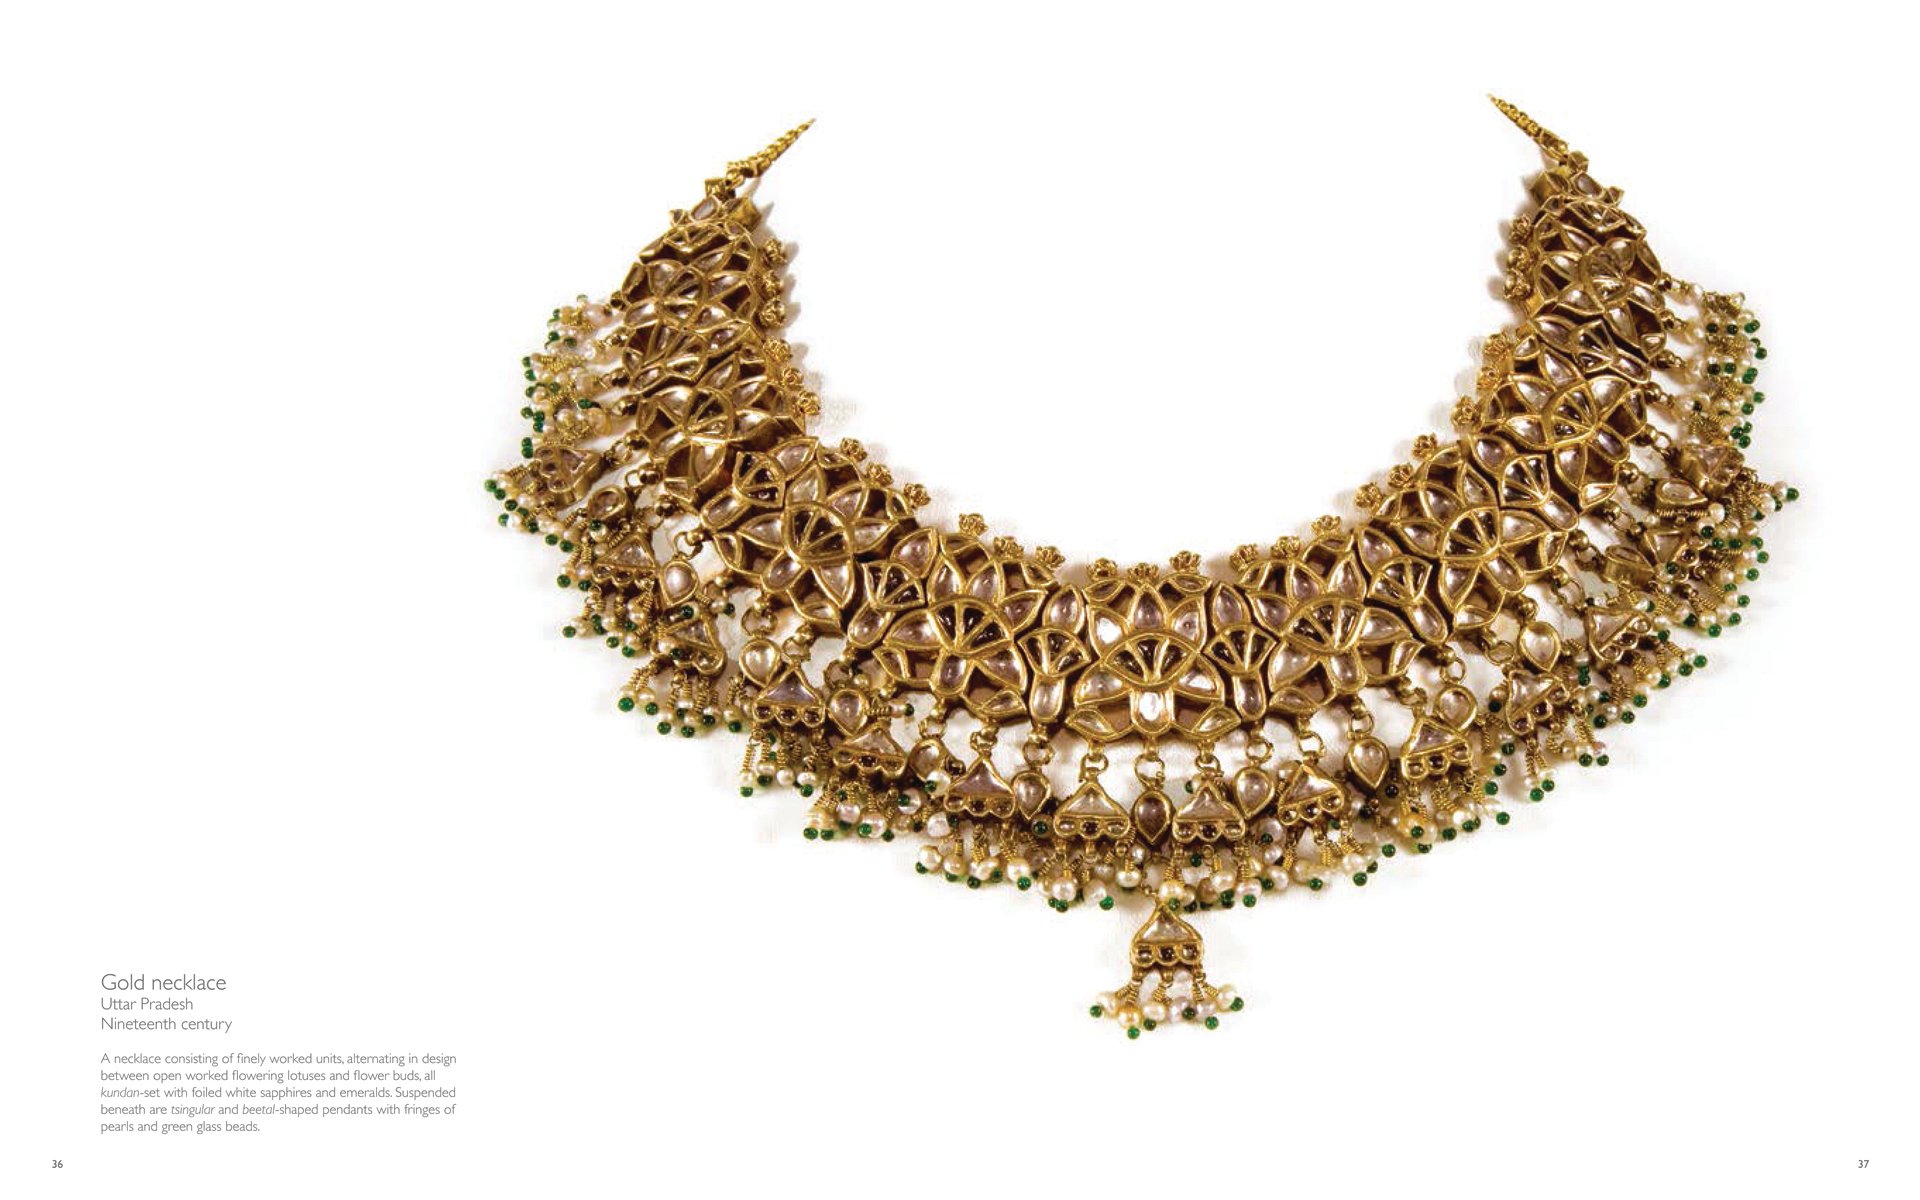 Photograph of a traditional Indian gold necklace decorated with gems and beads hanging on a white background with gold font title Traditional Indian Jewellery The Golden Smile of India underneath.